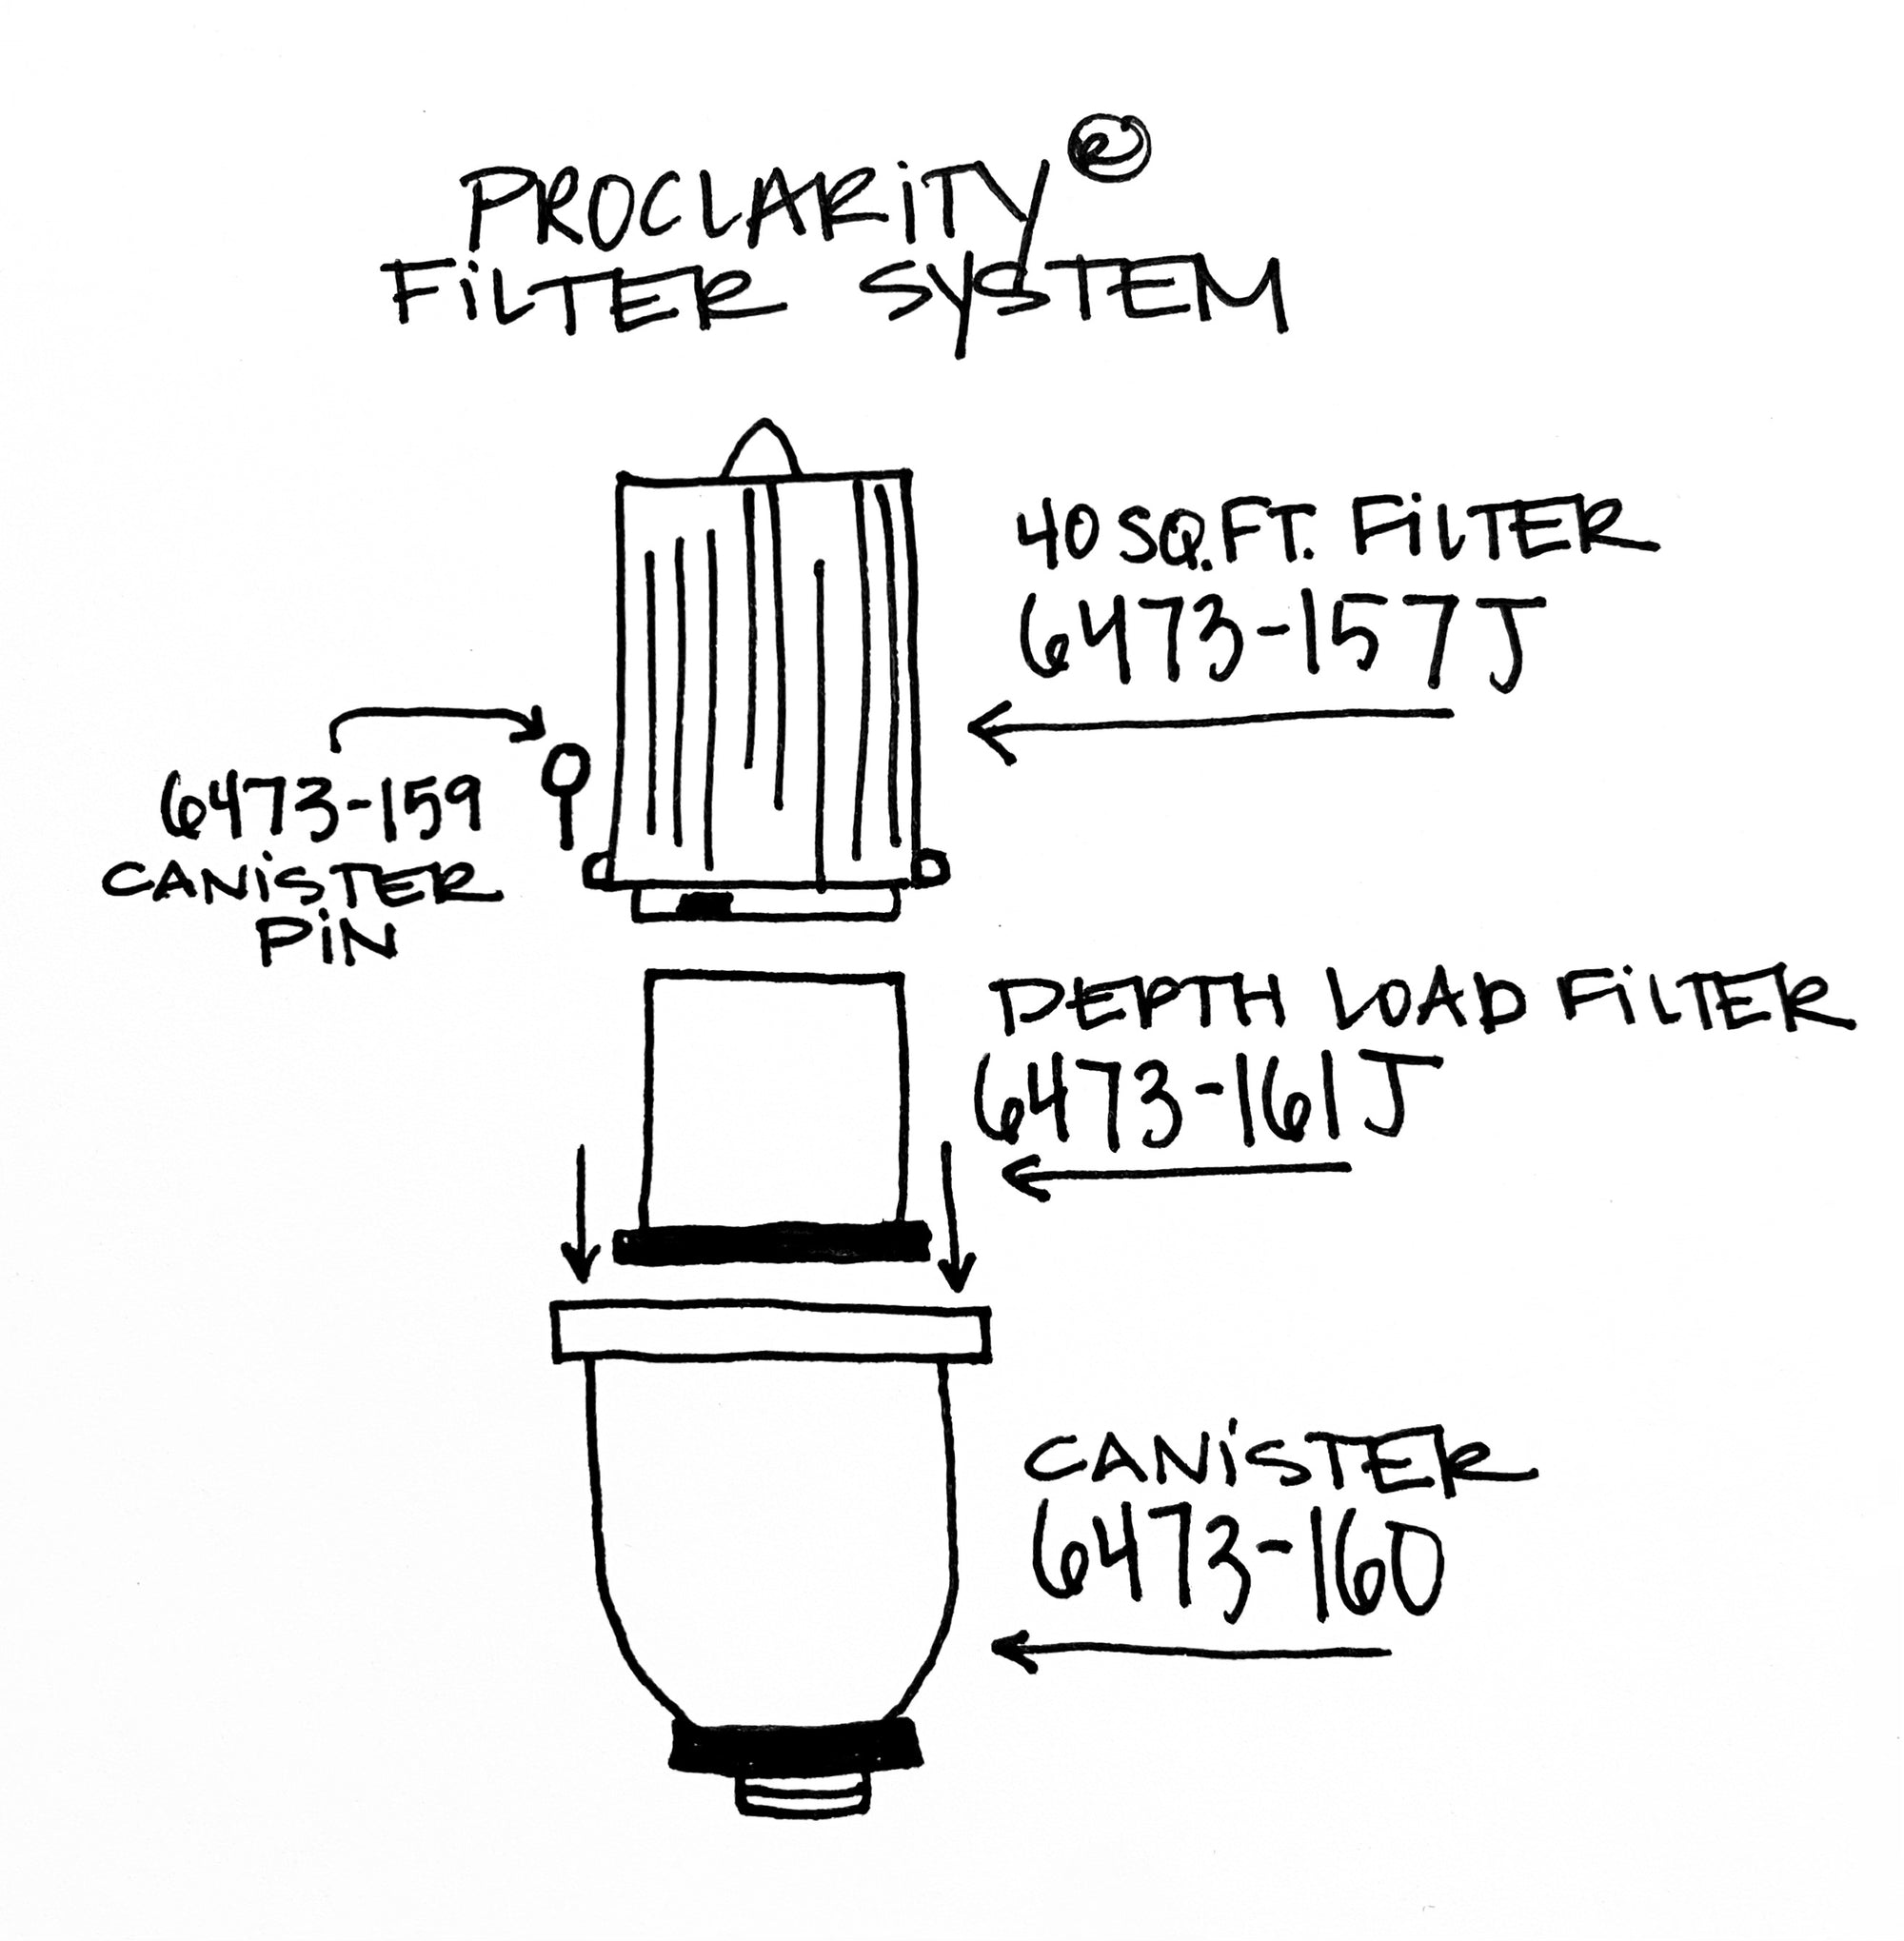 J400 filter, ProClarity, hot tub filter, ProClarity pin, canister pin, Jacuzzi filter, 6473-159